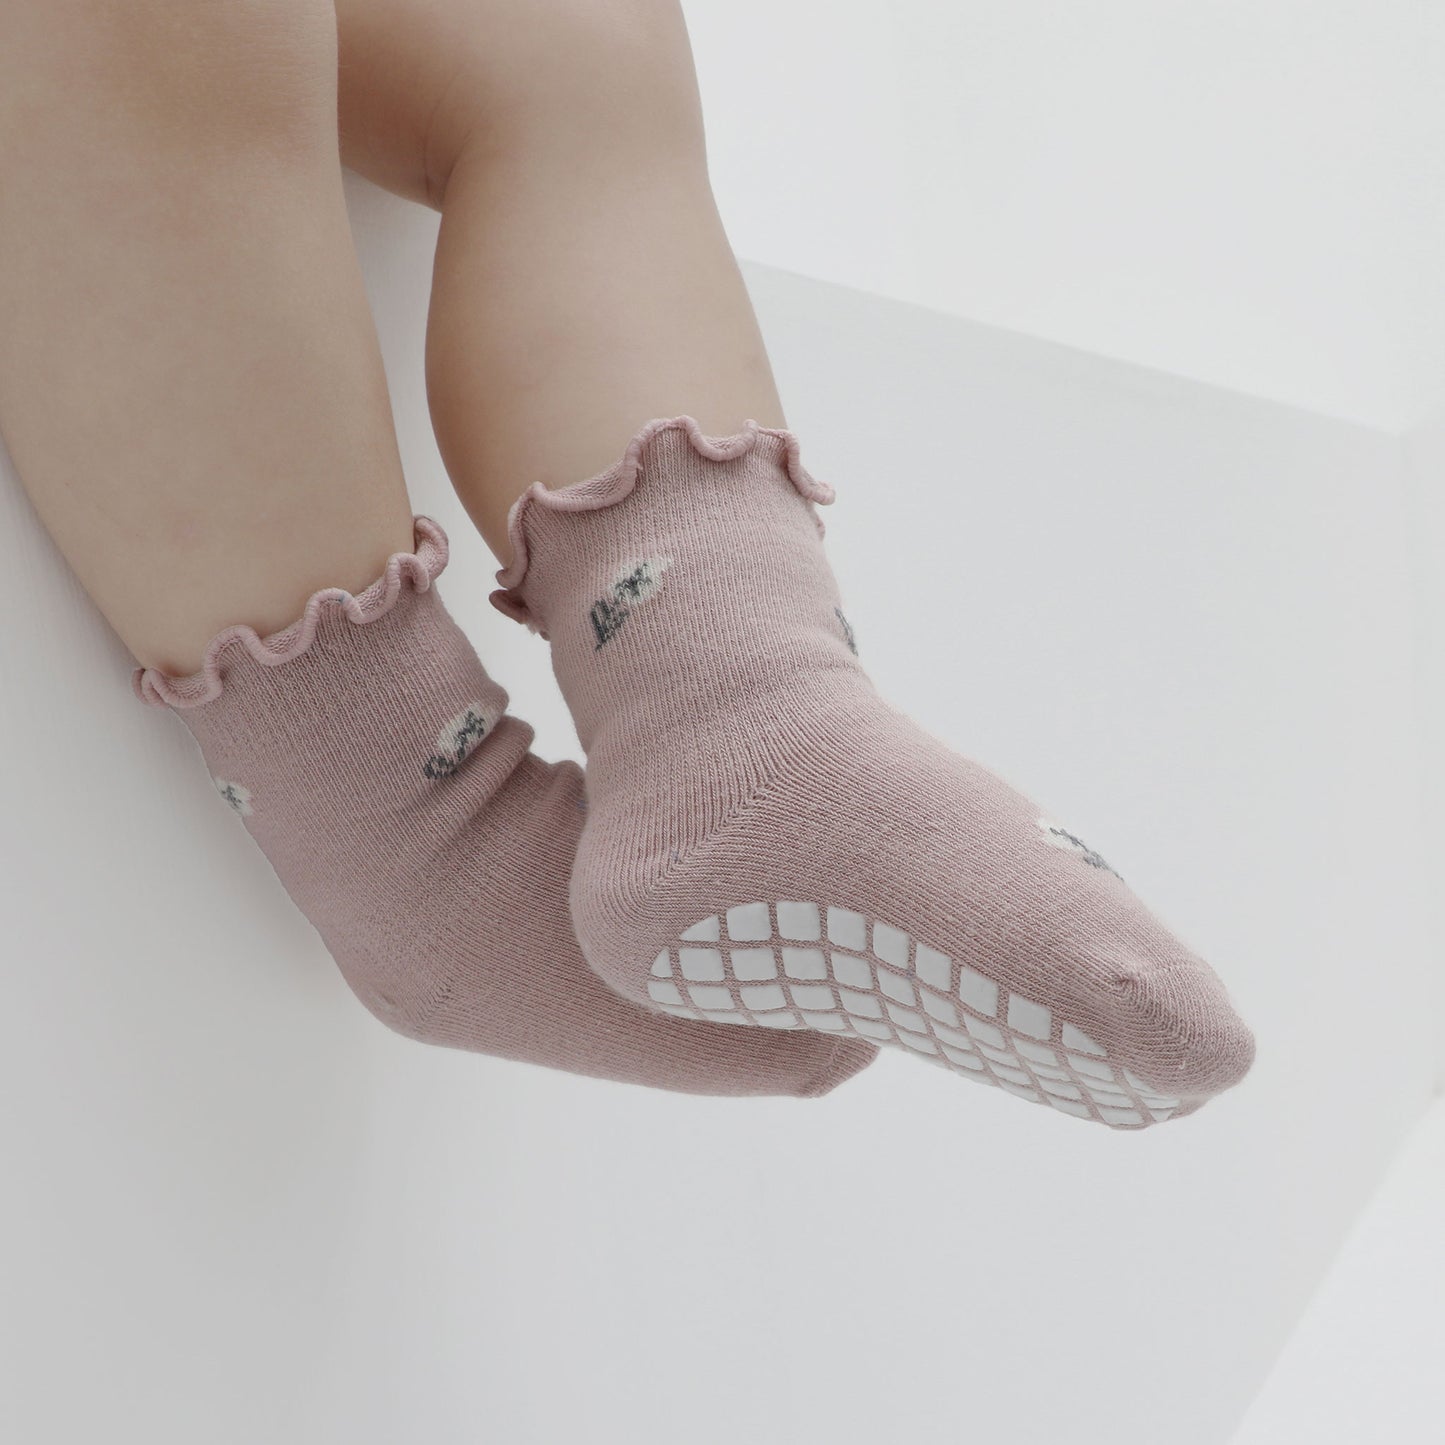 New- Little Wonder Things - 4 Pairs of Stay-On Baby & Toddler Non-Slip Socks